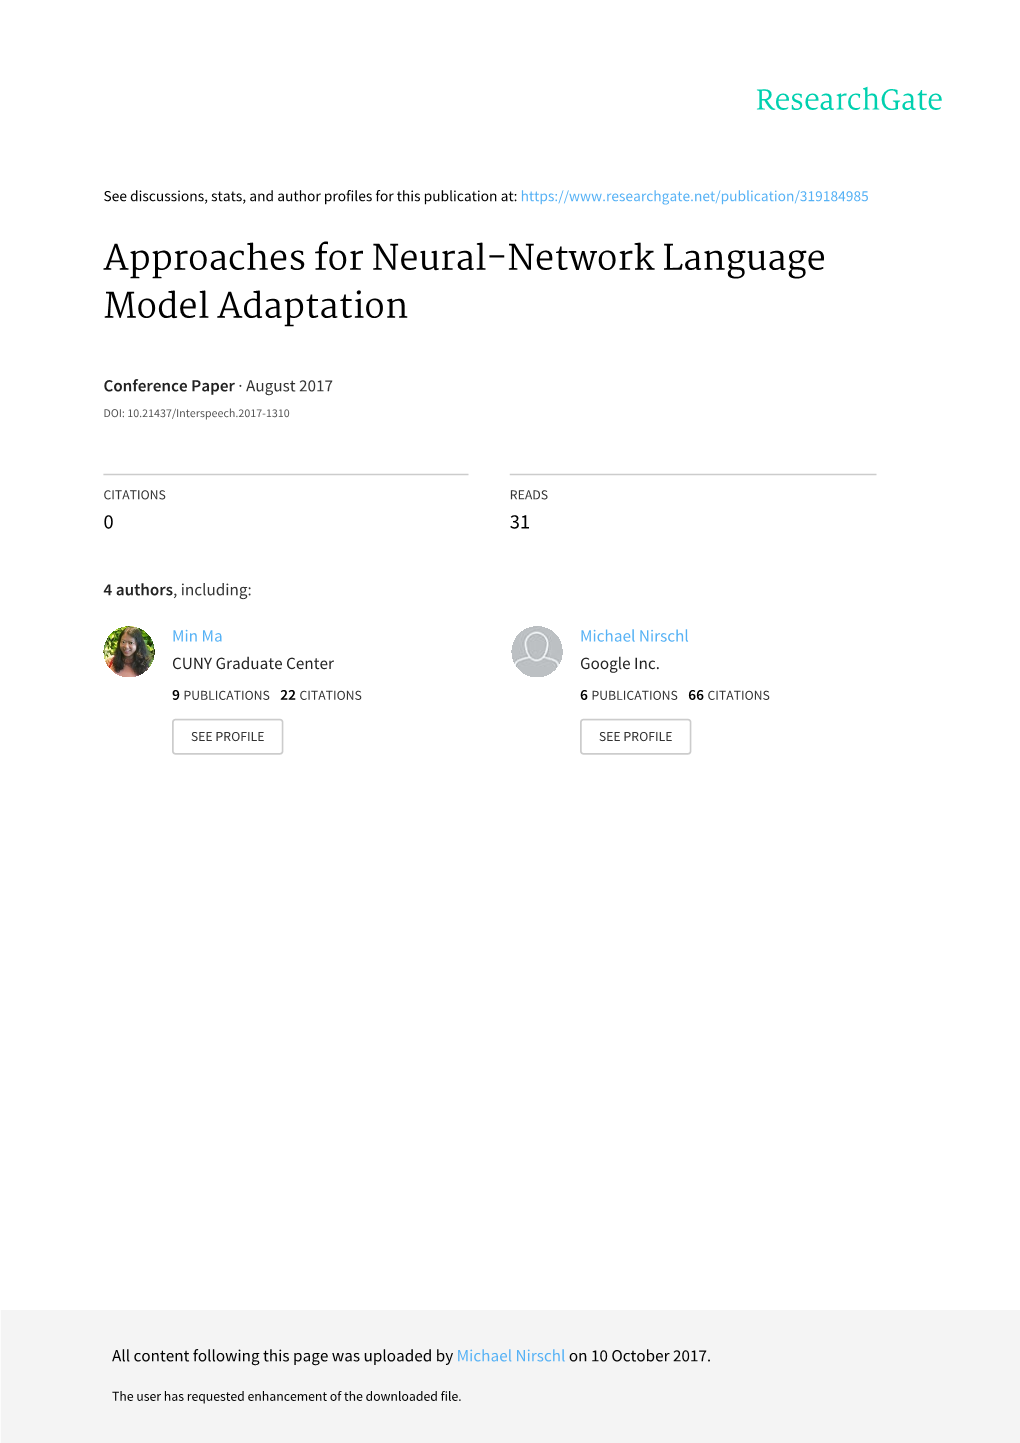 Approaches for Neural-Network Language Model Adaptation